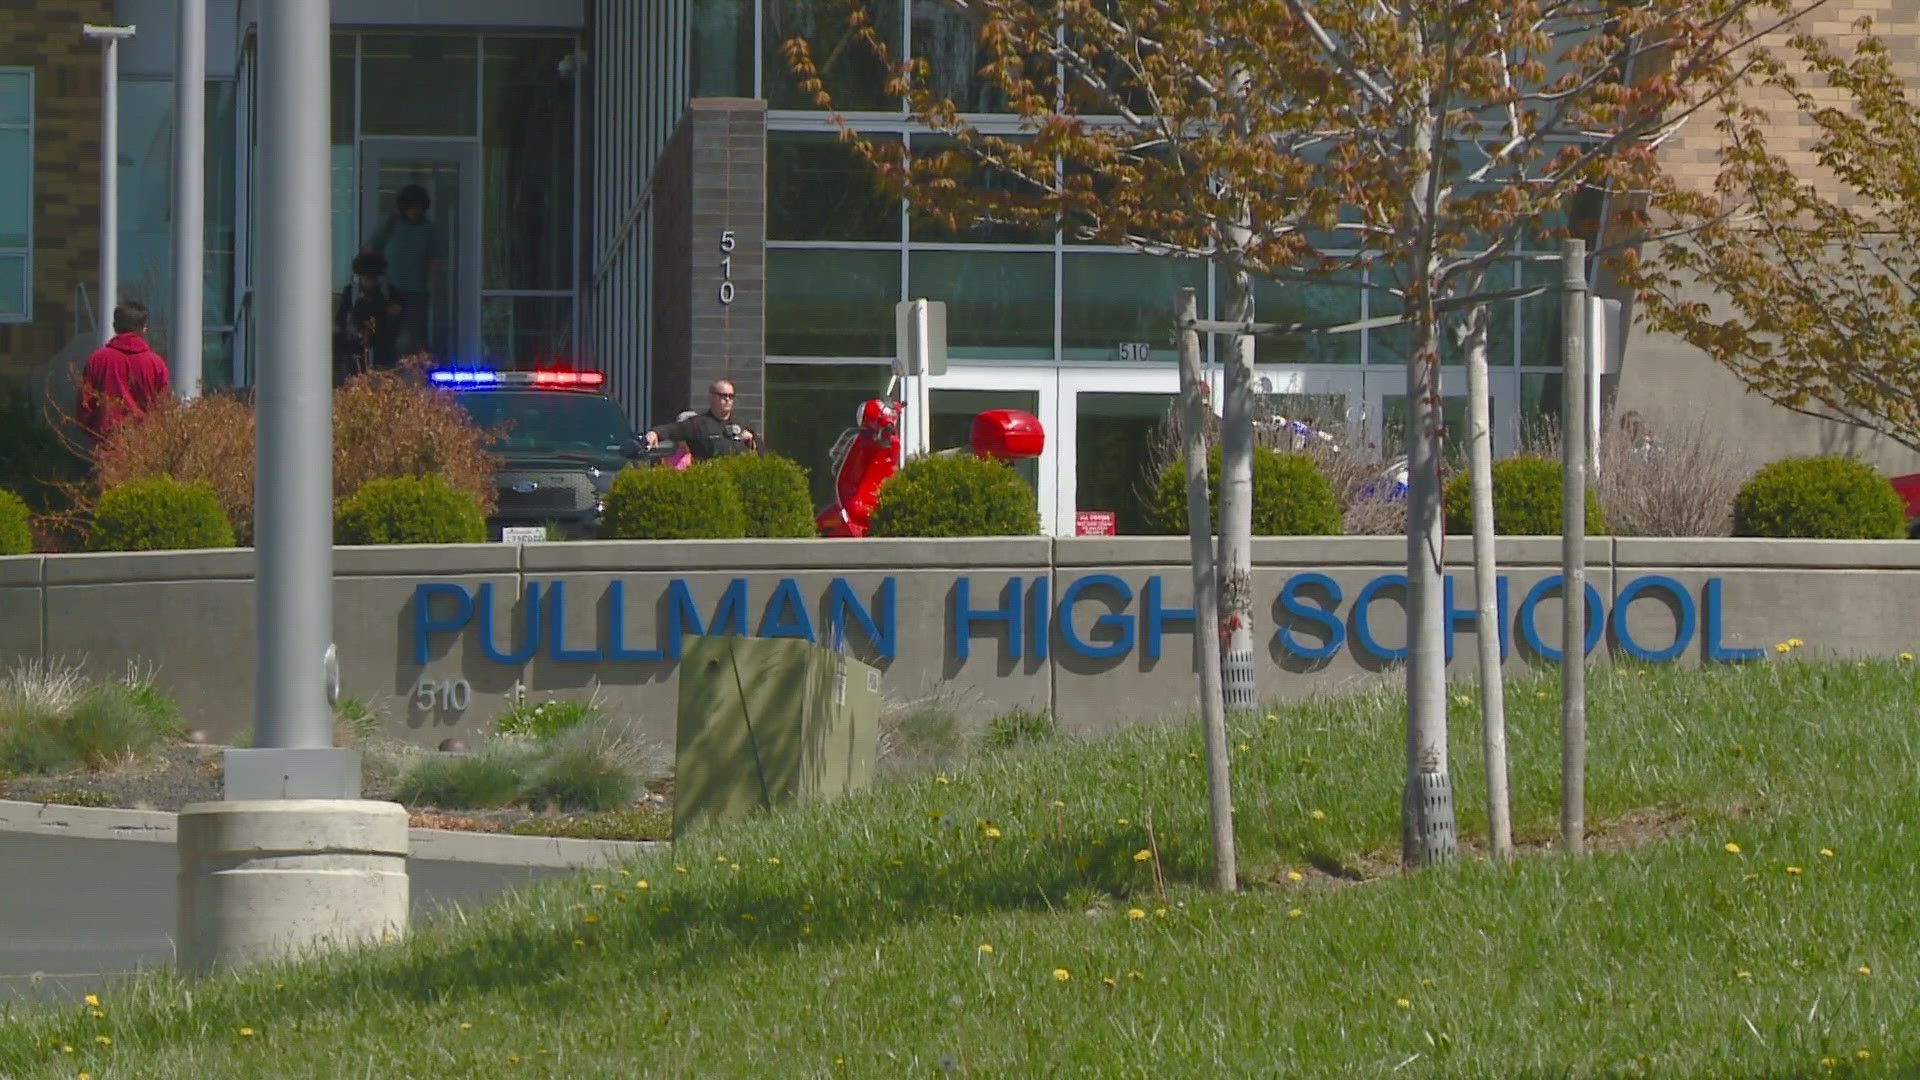 The Pullman High School versus North Central High School football game on Thursday abruptly ended after the alleged incident.